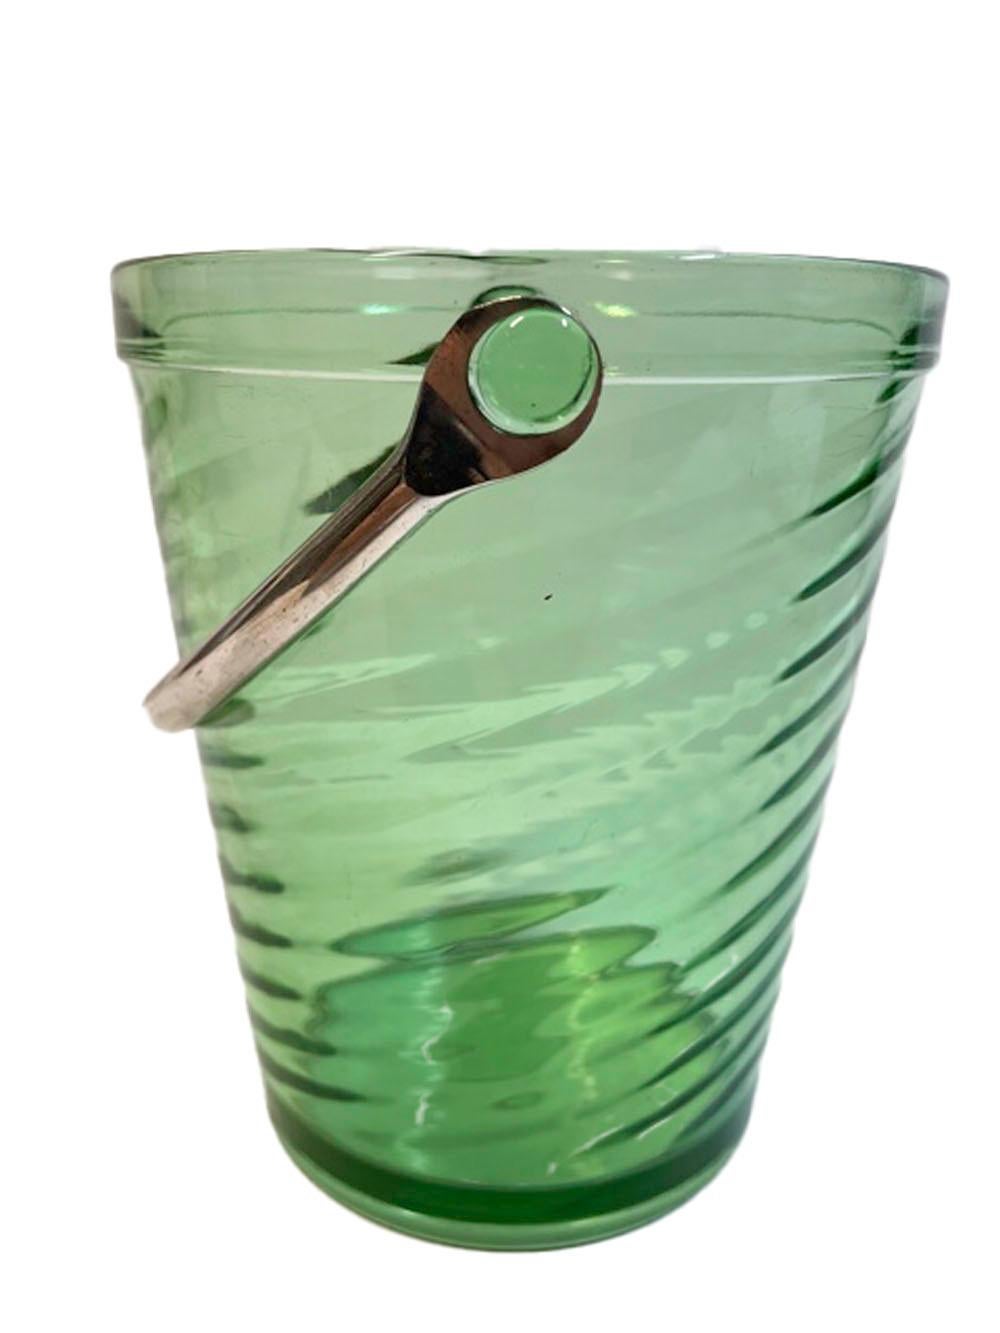 Vintage ice bucket of pail form with an optical swirled glass body and metal swing handle attached to lugs along the rim.